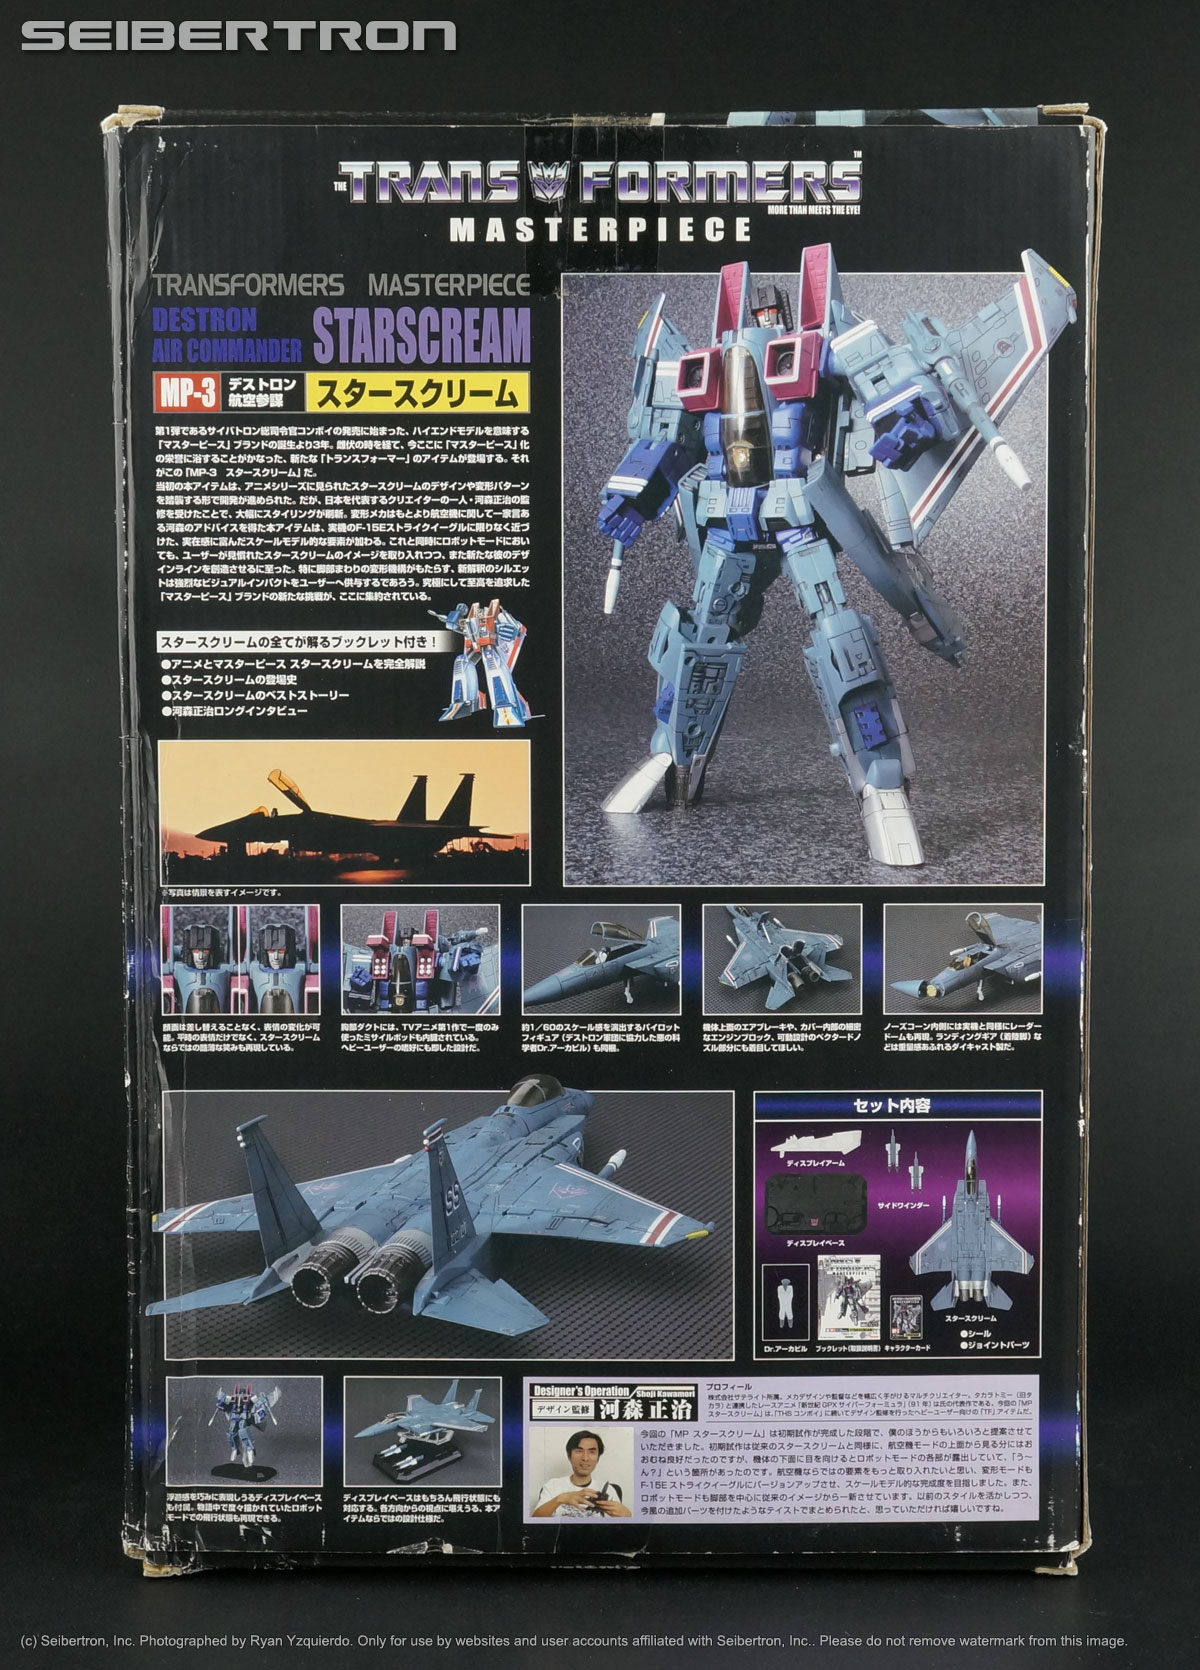 Transformers, Gobots, Shopkins, Masters of the Universe, Teenage Mutant Ninja Turtles, Comic Books, and other items items listings from Seibertron.com: MP-3 STARSCREAM Transformers Masterpiece 100% complete Takara 2006